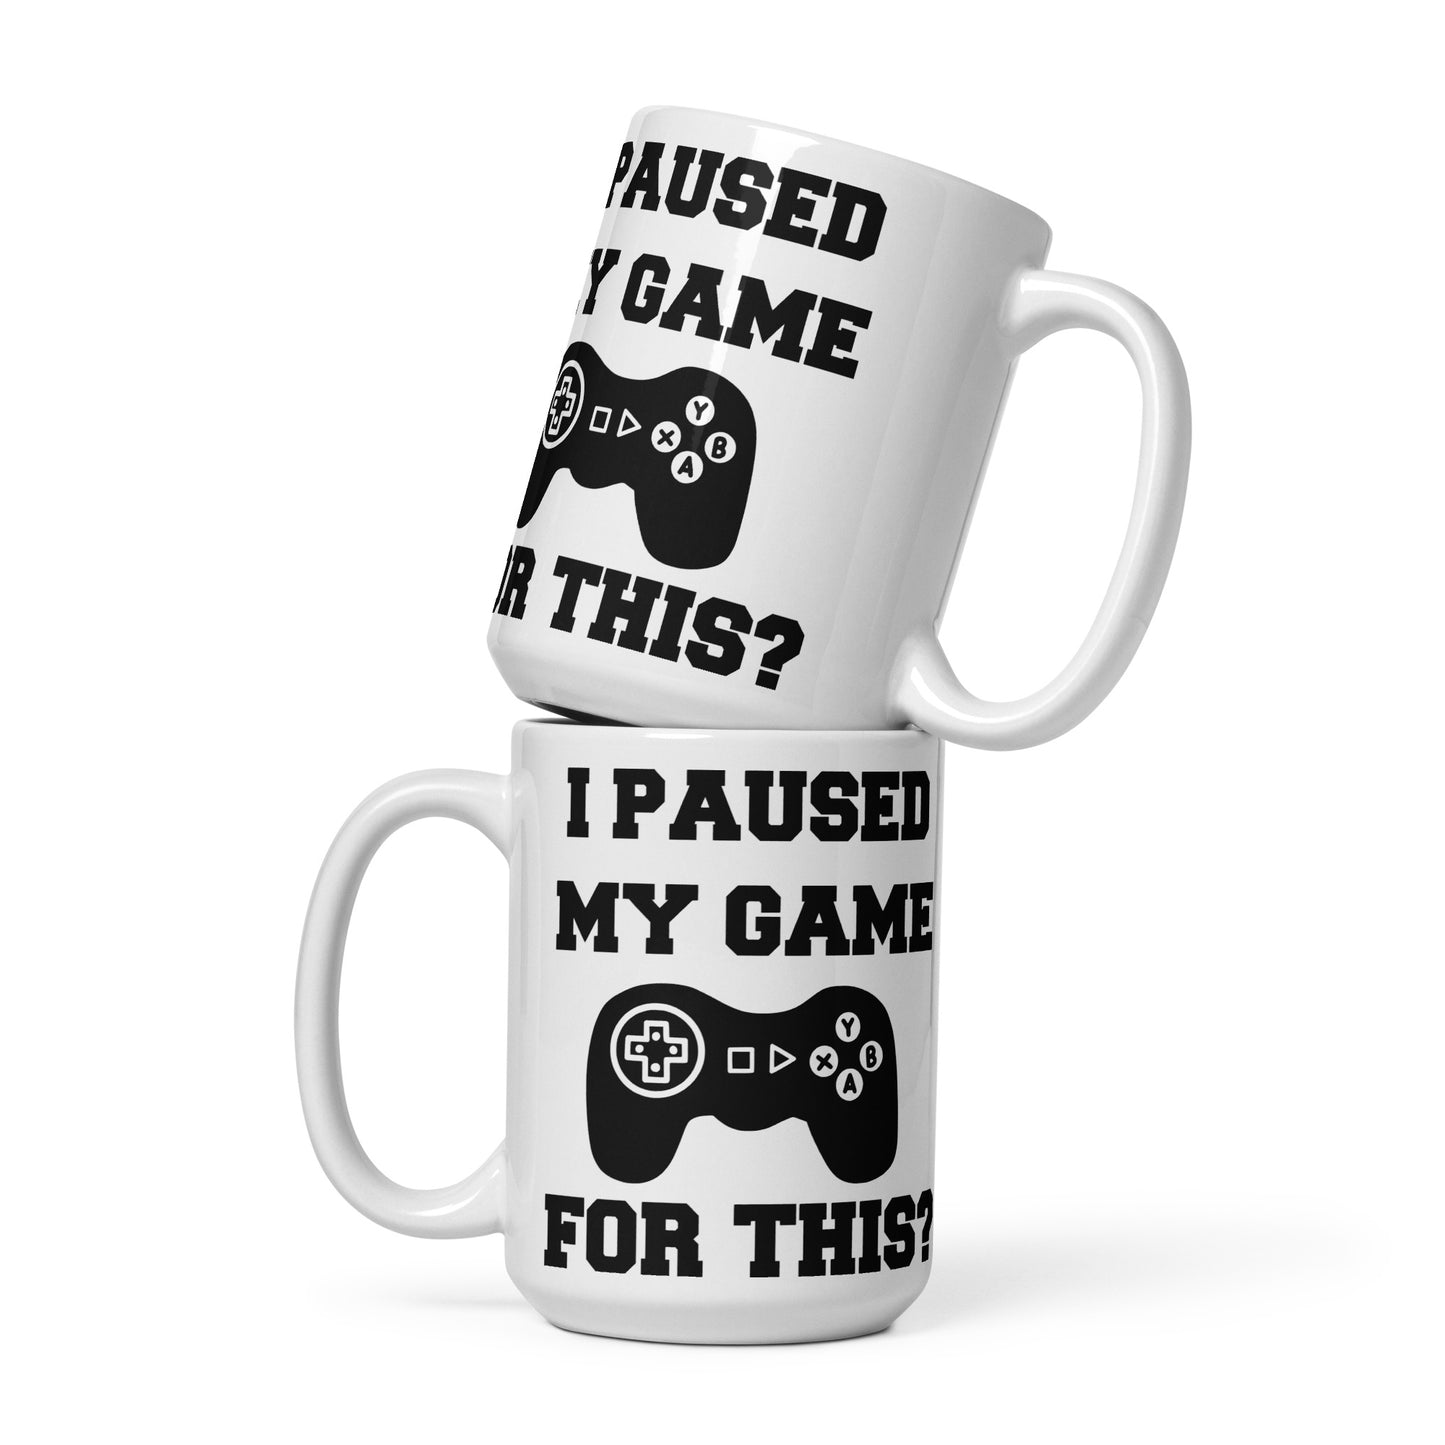 White Shiny Mug: I paused my game for this?